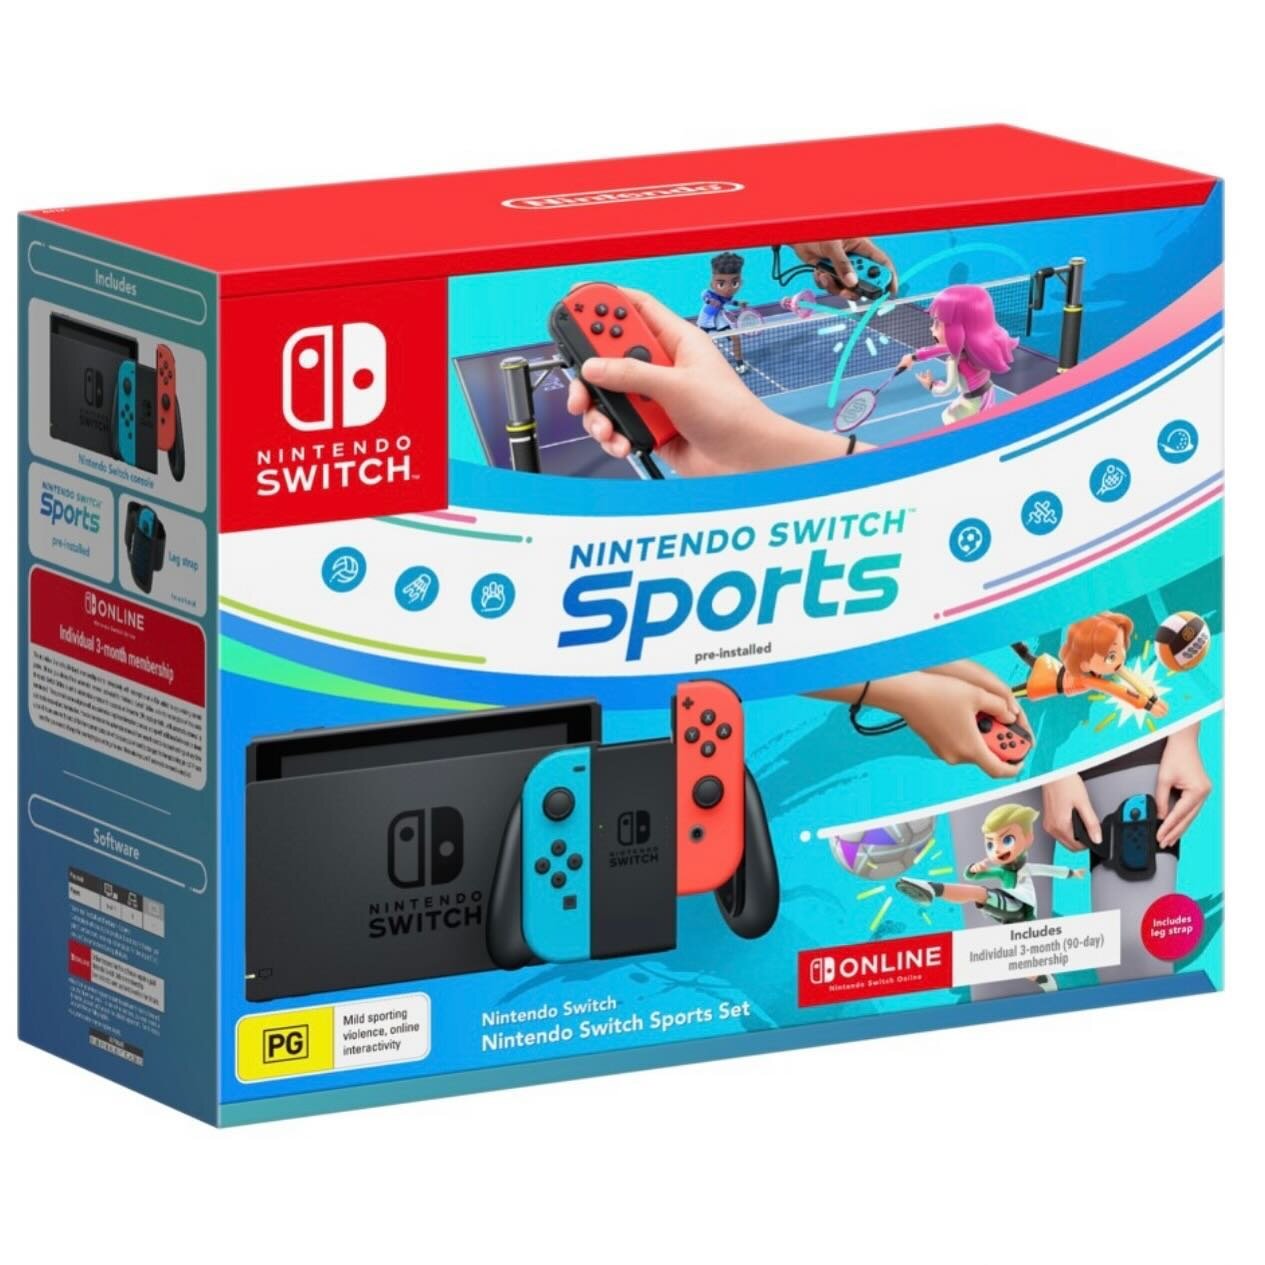 🎉 GIVEAWAY ALERT! 🎉

We are excited to announce that we&rsquo;re giving away a Nintendo Switch Console Neon, Wii Sports Edition. 🎮🏆

To enter &amp; be eligible to win, here&rsquo;s what you need to do:
1️⃣ Like our page to stay updated with all t